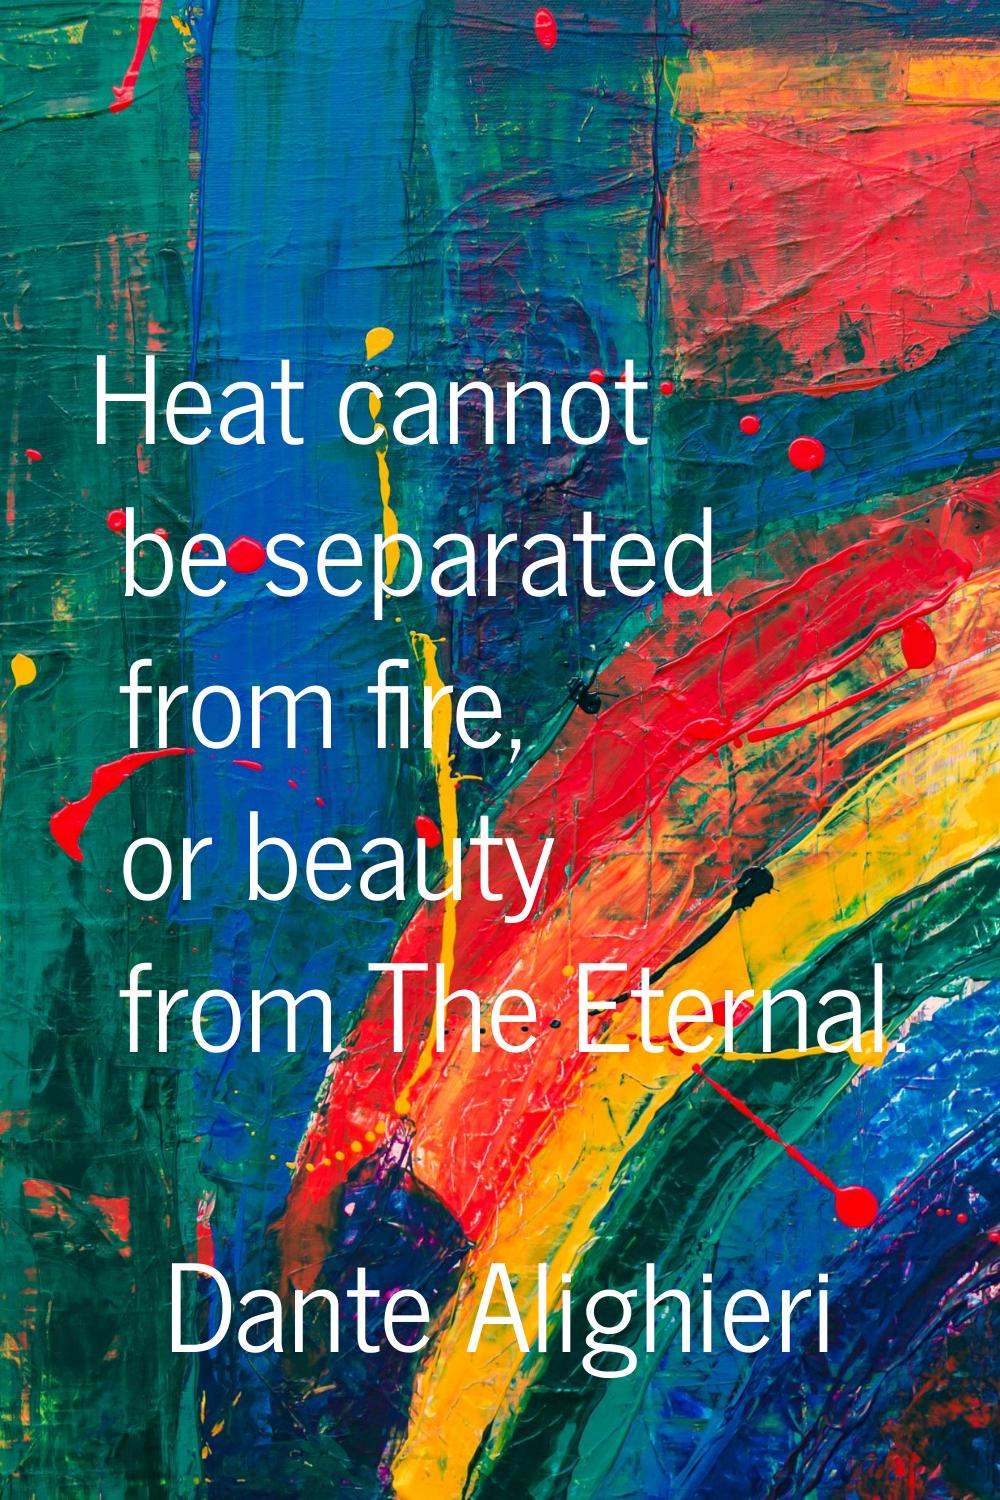 Heat cannot be separated from fire, or beauty from The Eternal.